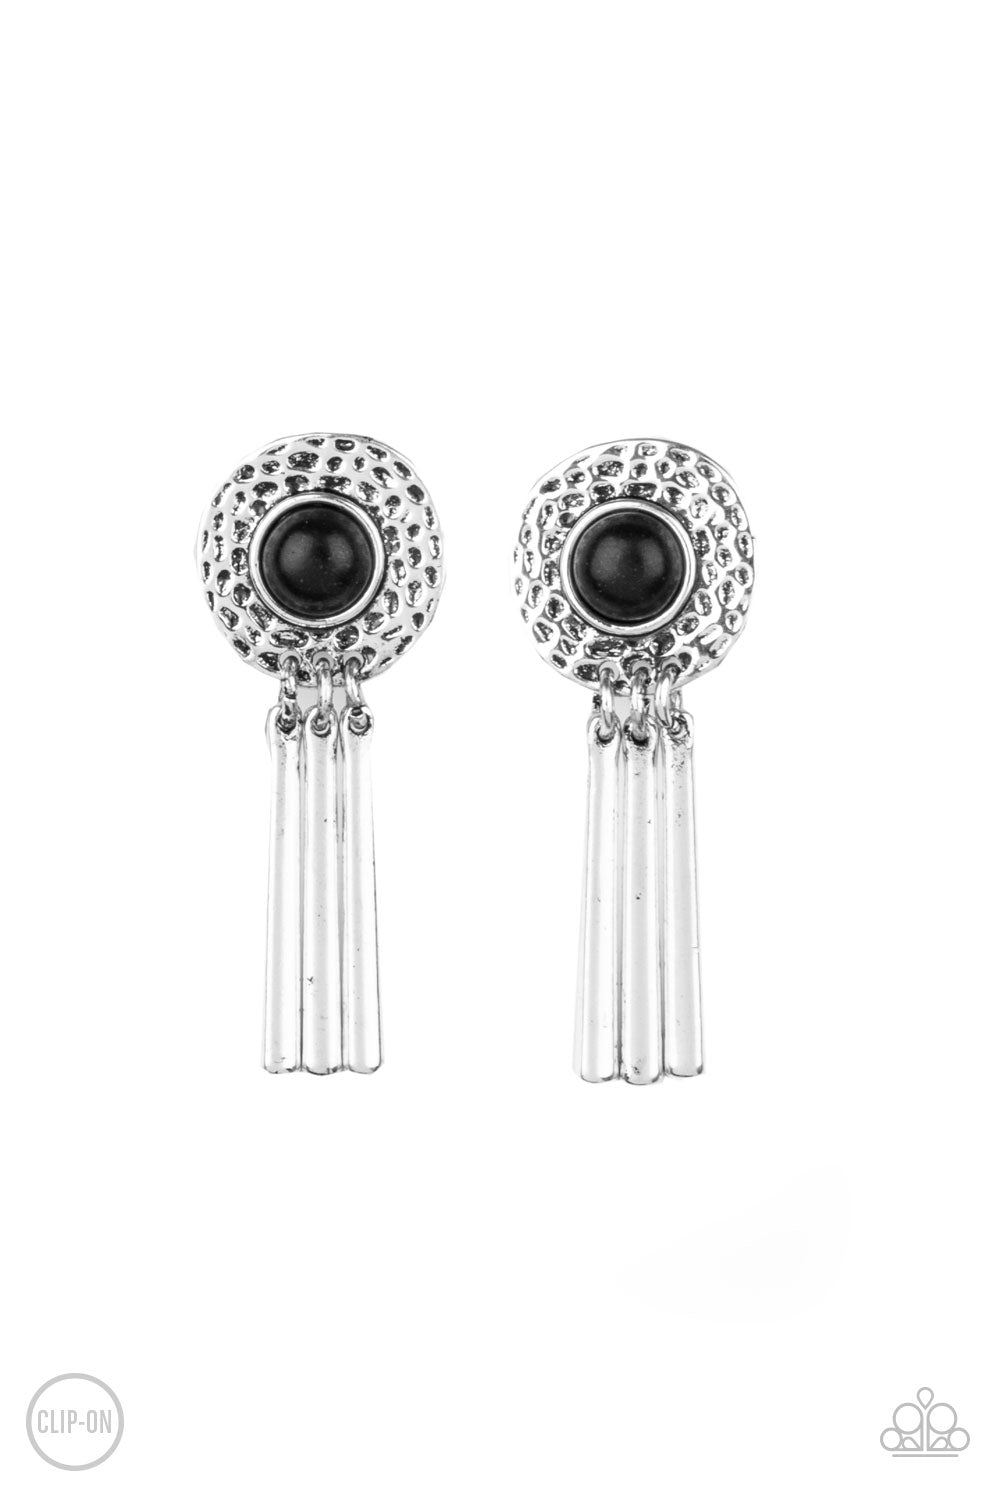 Paparazzi Accessories Desert Amulet - Black Clip-on Earrings - Lady T Accessories